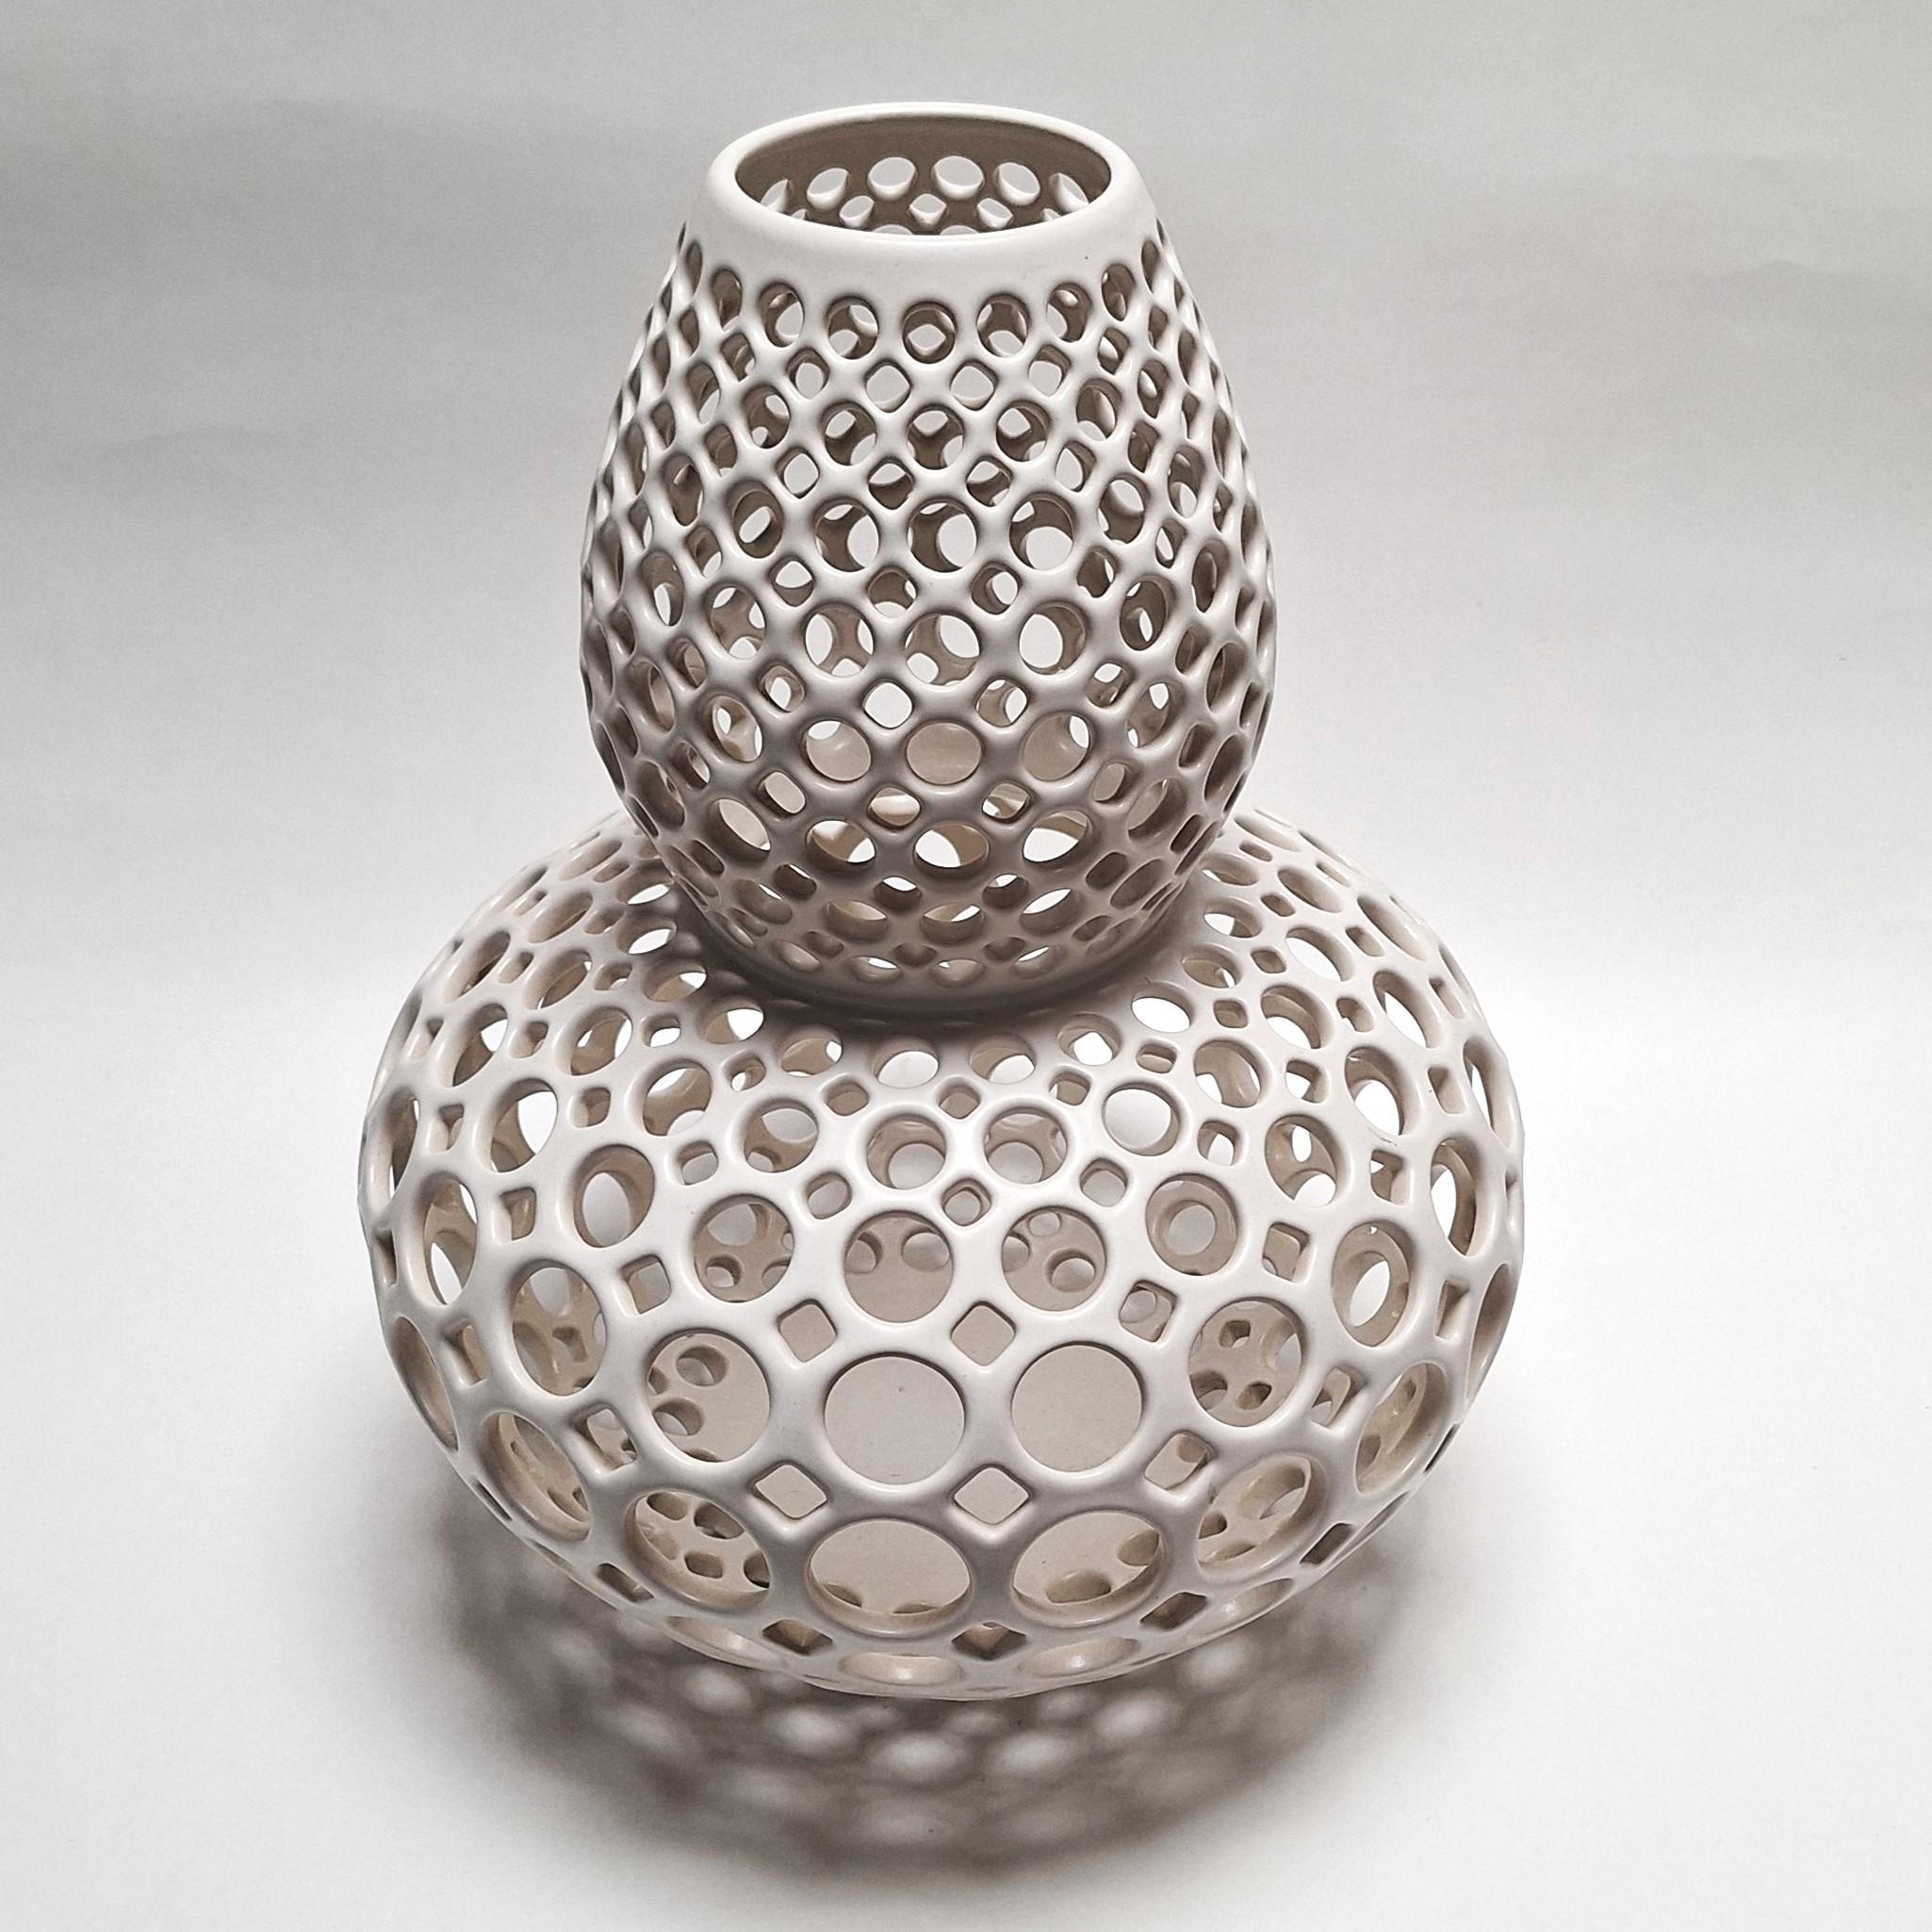 Lynne Meade Abstract Sculpture - Double Gourd Round Lace White - contemporary modern ceramic vessel object